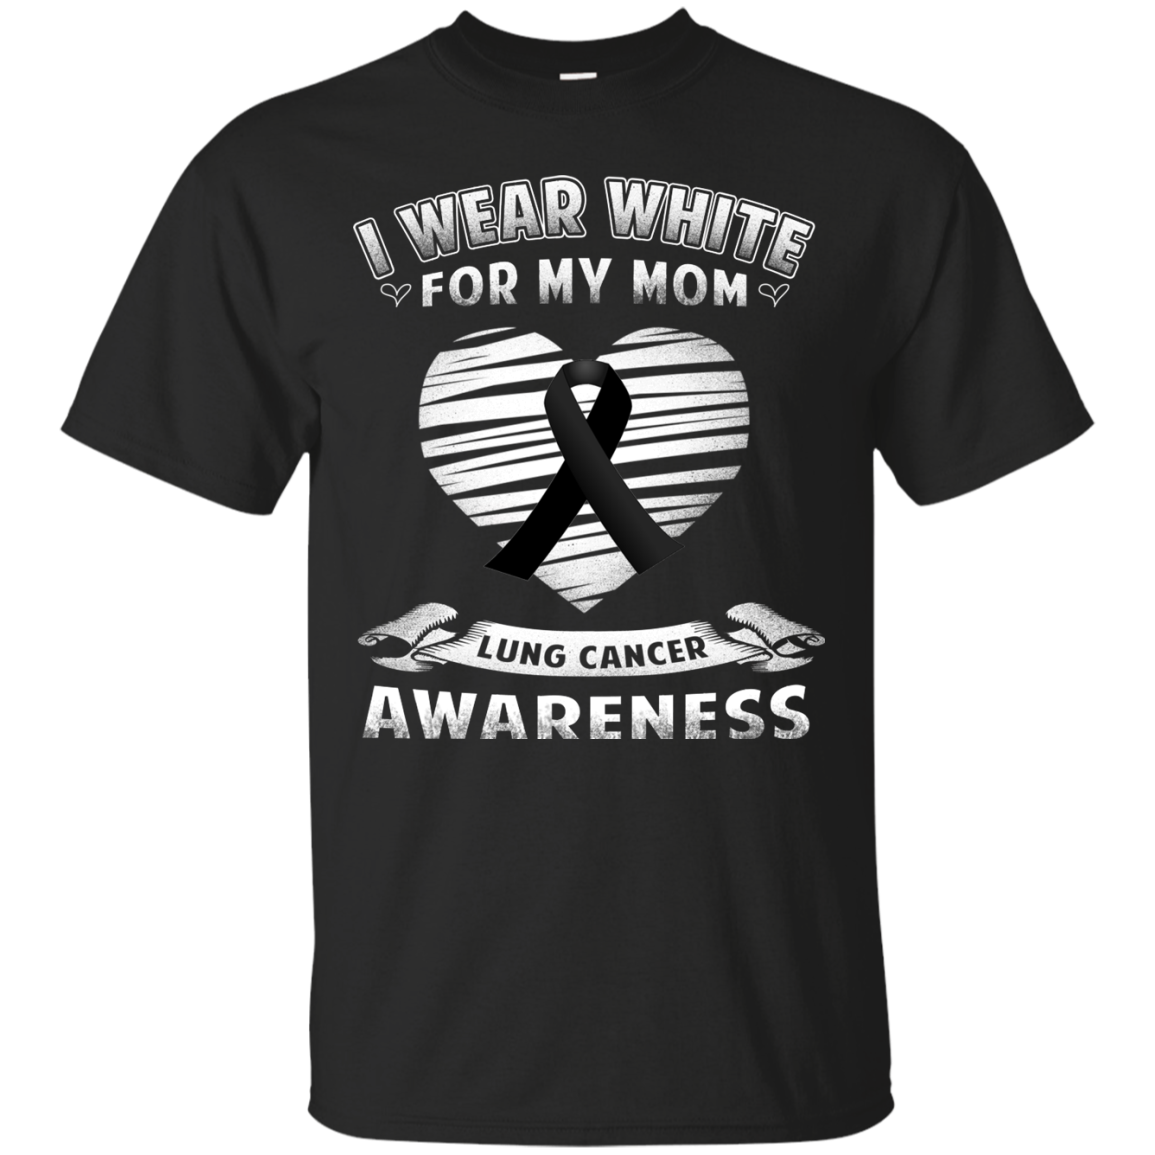 Shop From 1000 Unique I Wear For My Mom Lung Cancer Awareness T-shirt